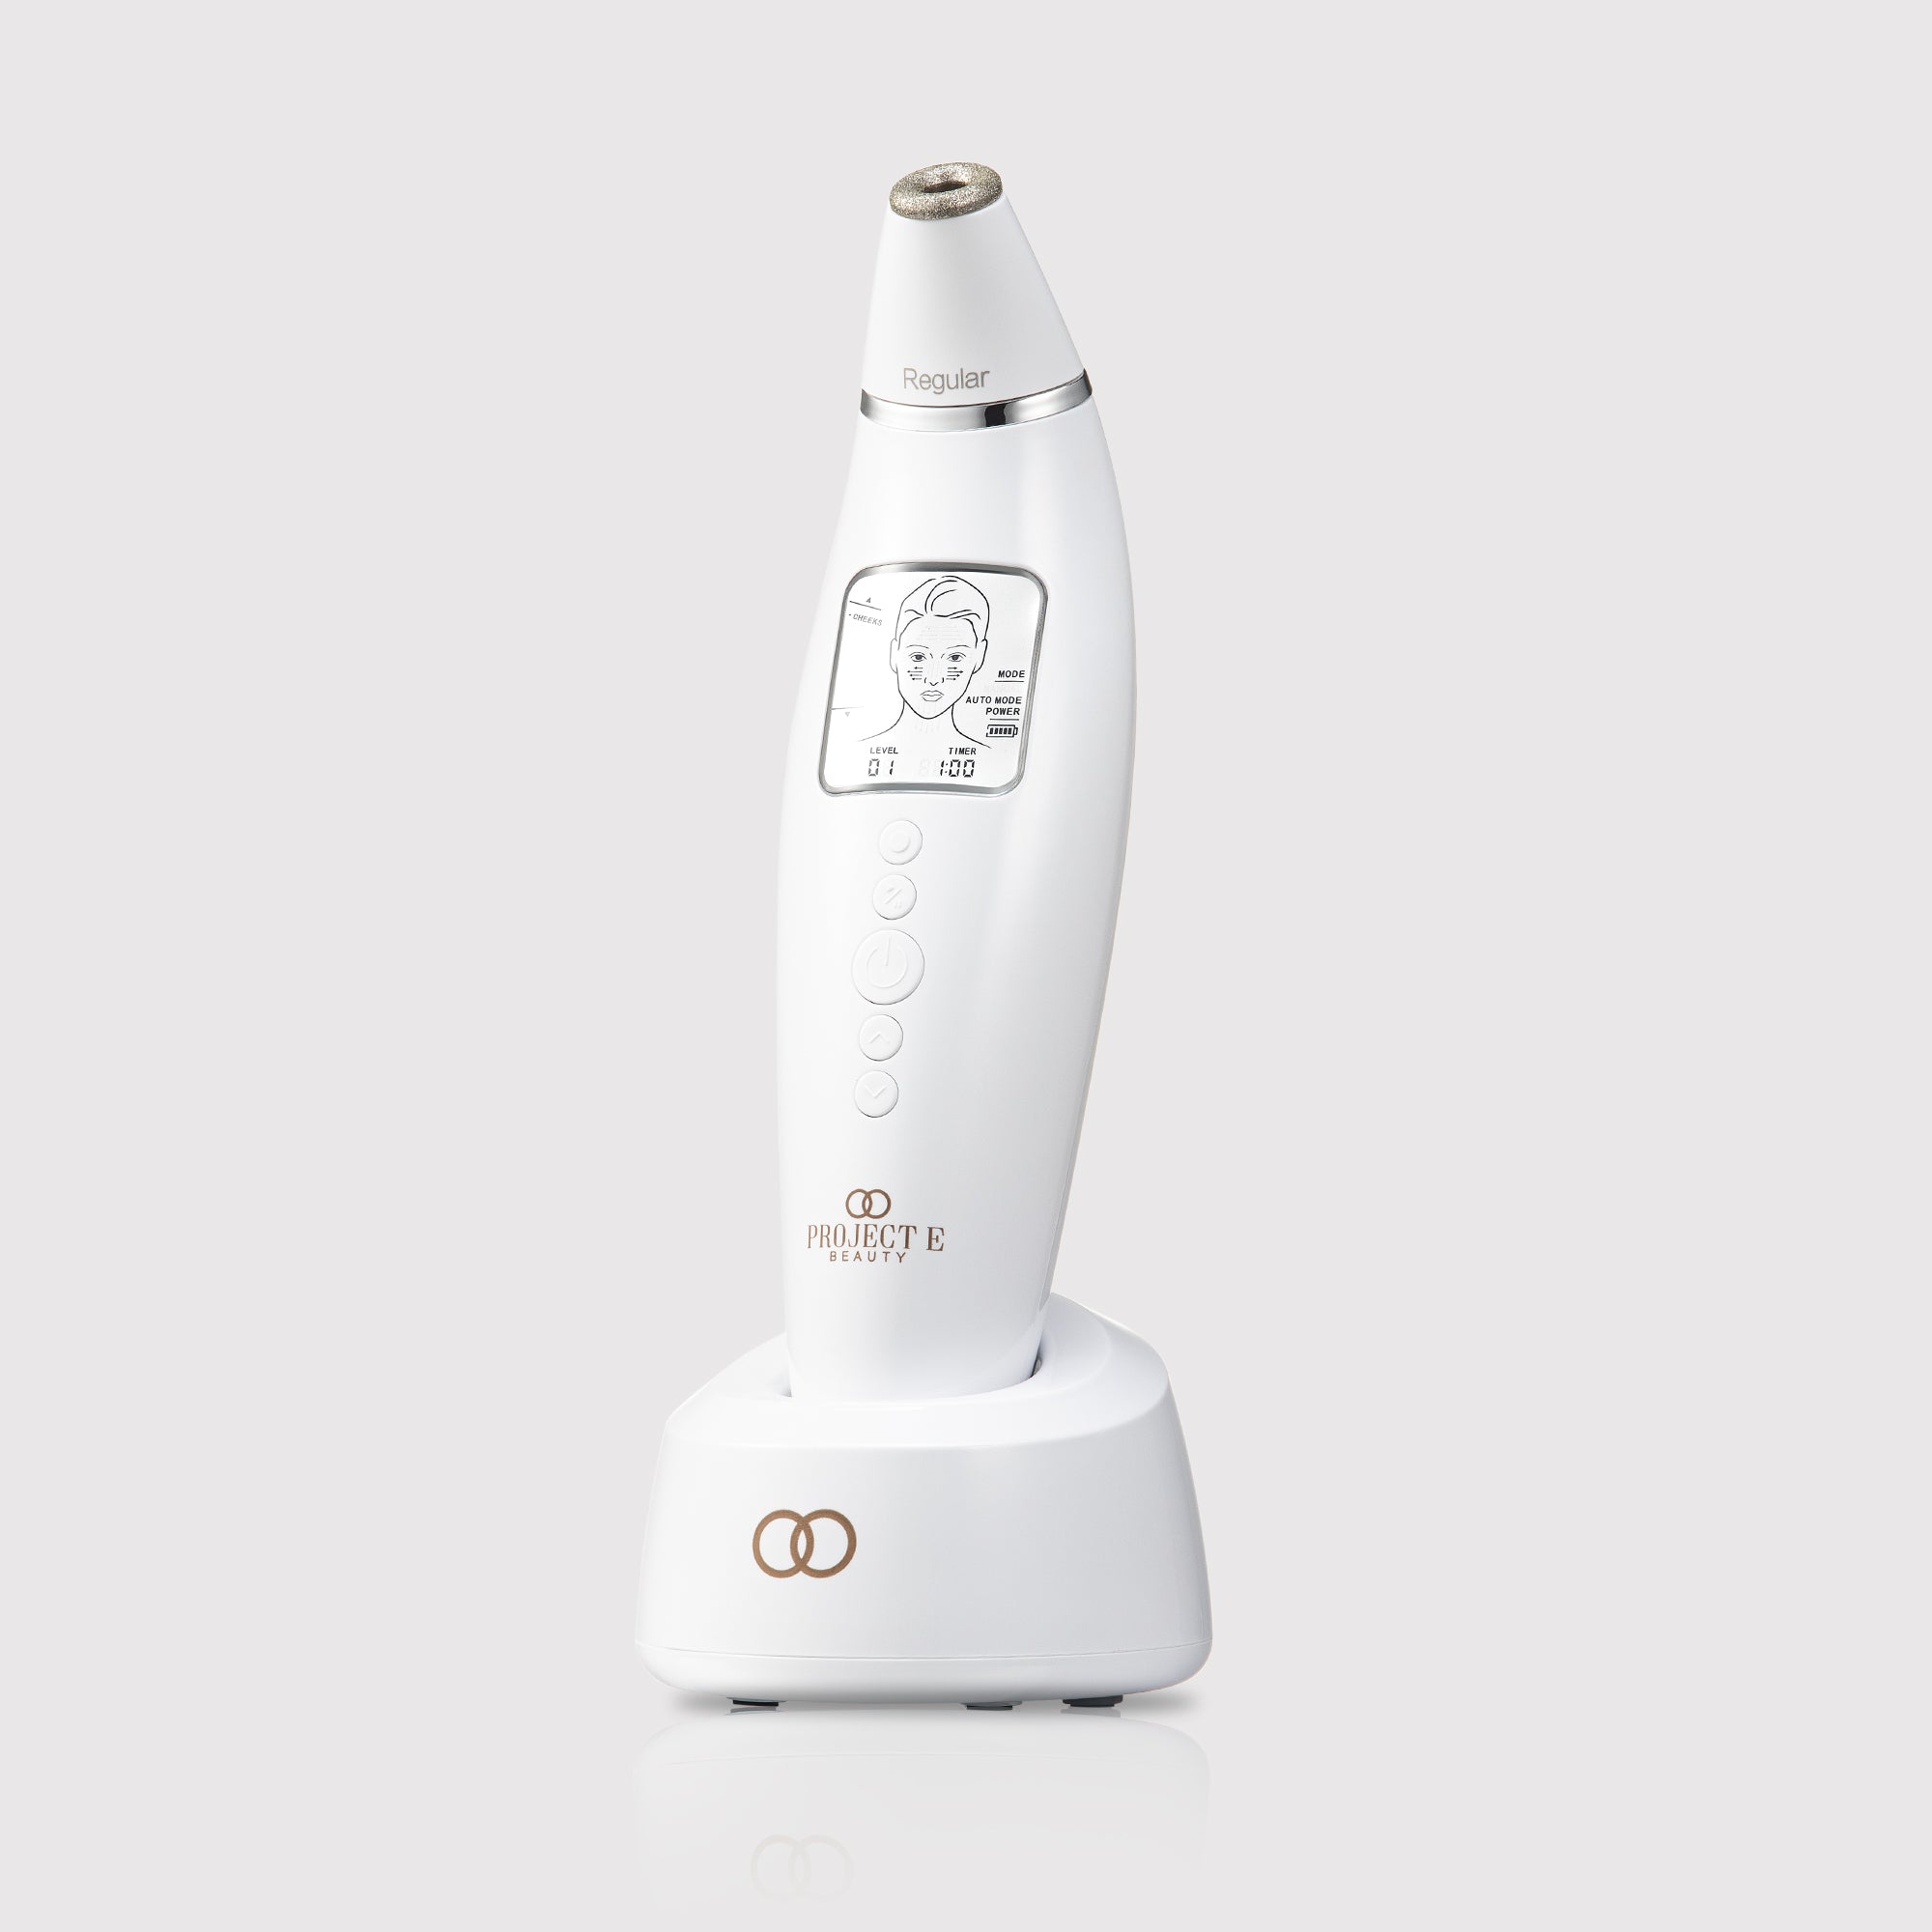 This On-Sale Microdermabrasion Device Makes My Skin